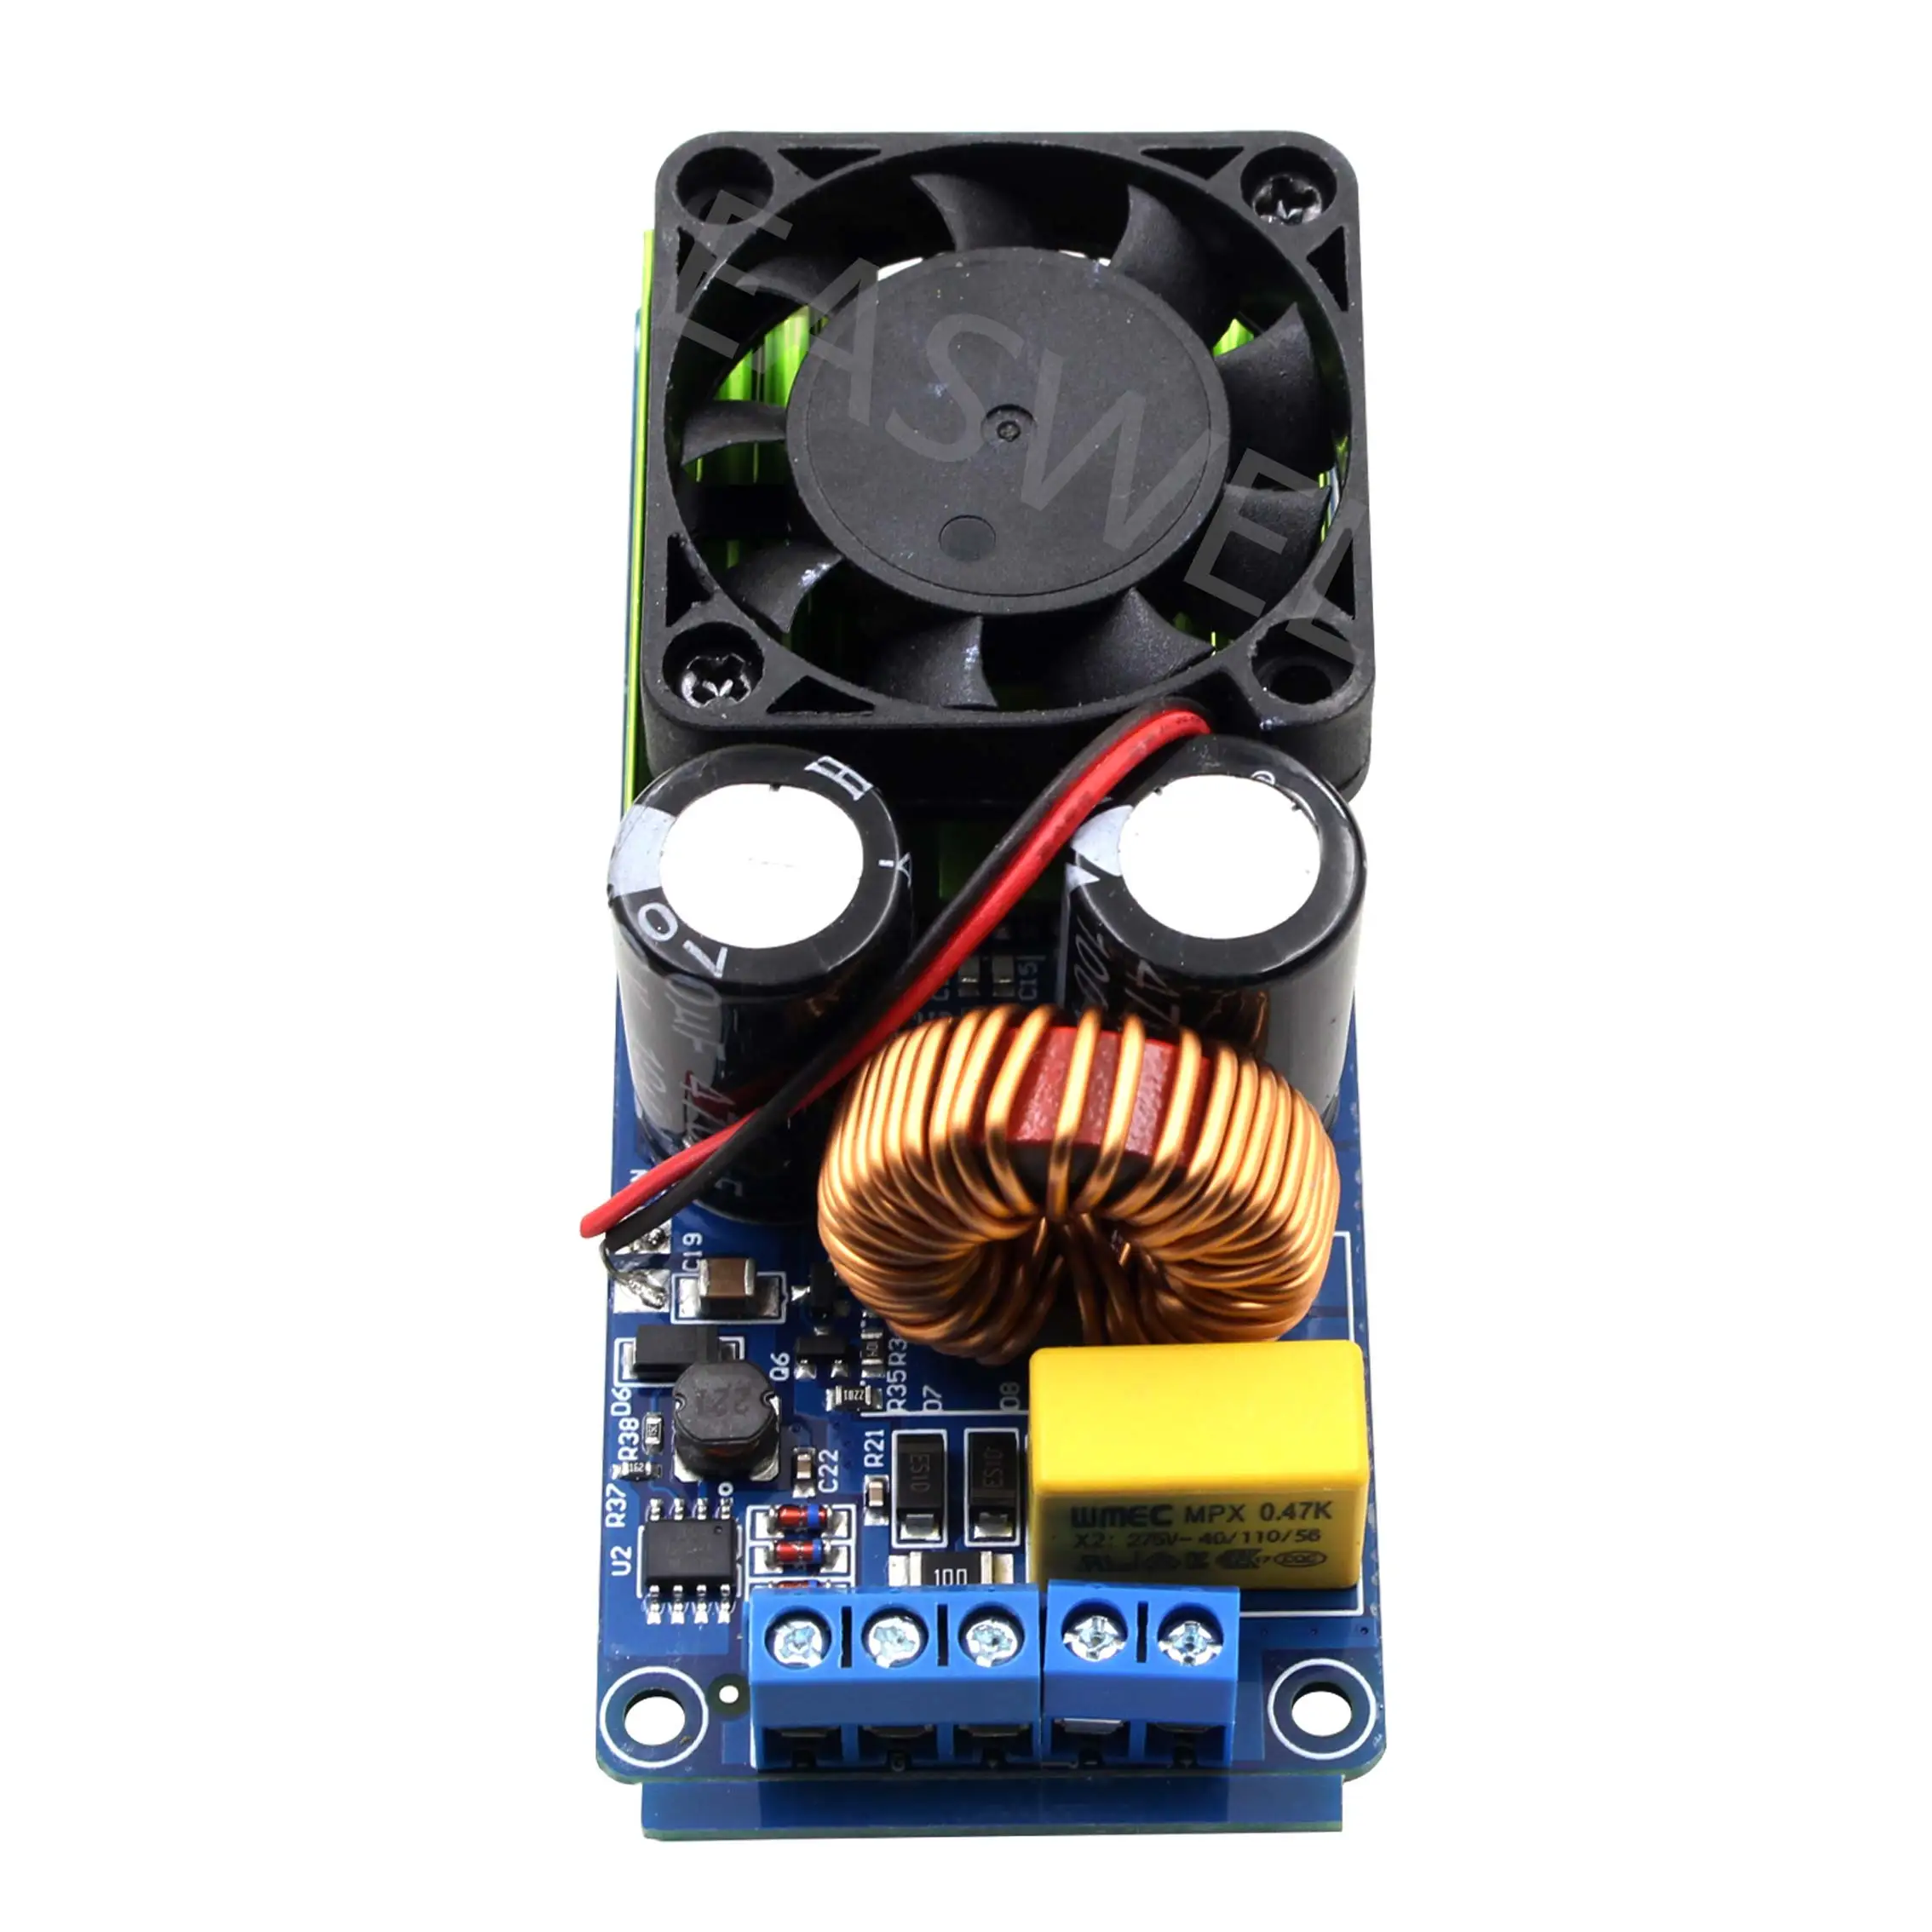 

High Voltage High Performance Digital Class D HIFI Power Amp Board With FAN IRS2092S 500W mono amplifier board